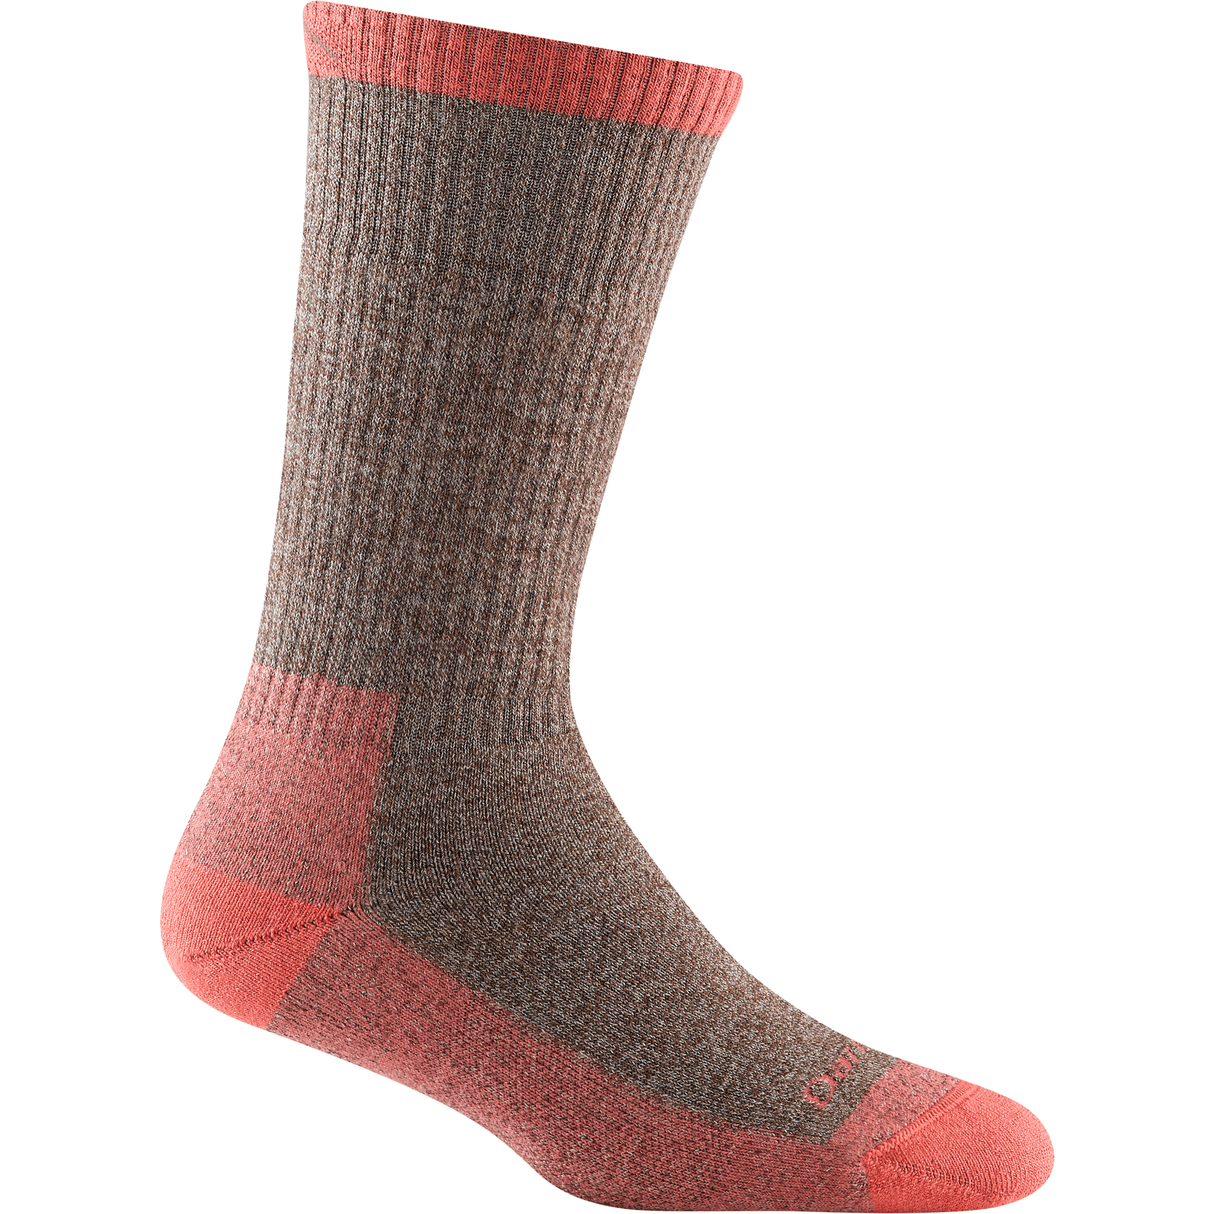 Darn Tough Womens Nomad Boot Midweight Hiking Socks  -  Small / Brown